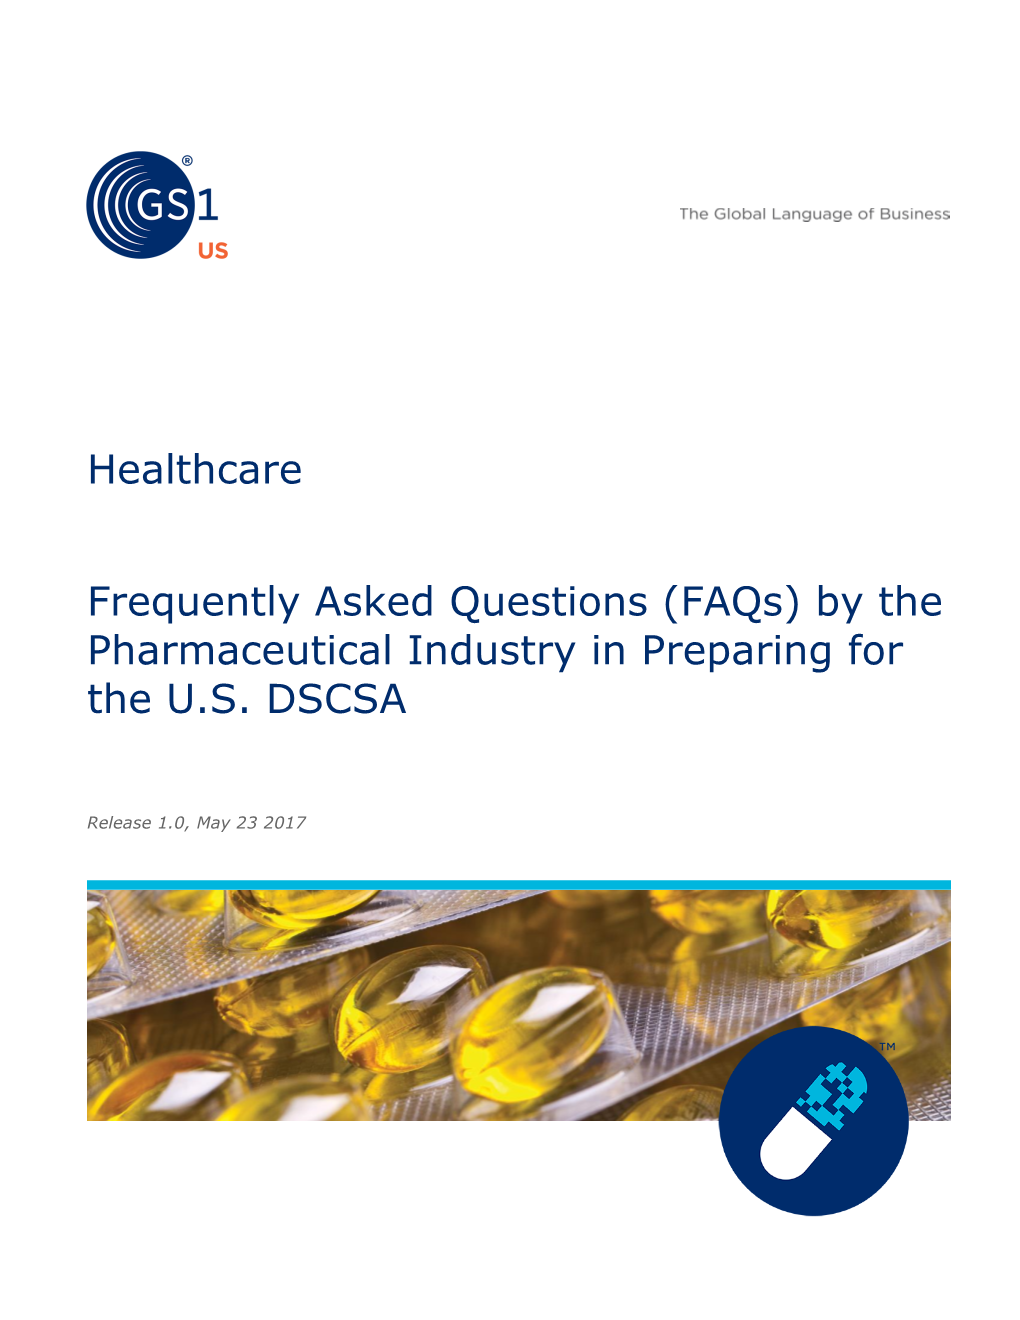 GS1 Faqs by the Pharma Industry Preparing for DSCSA